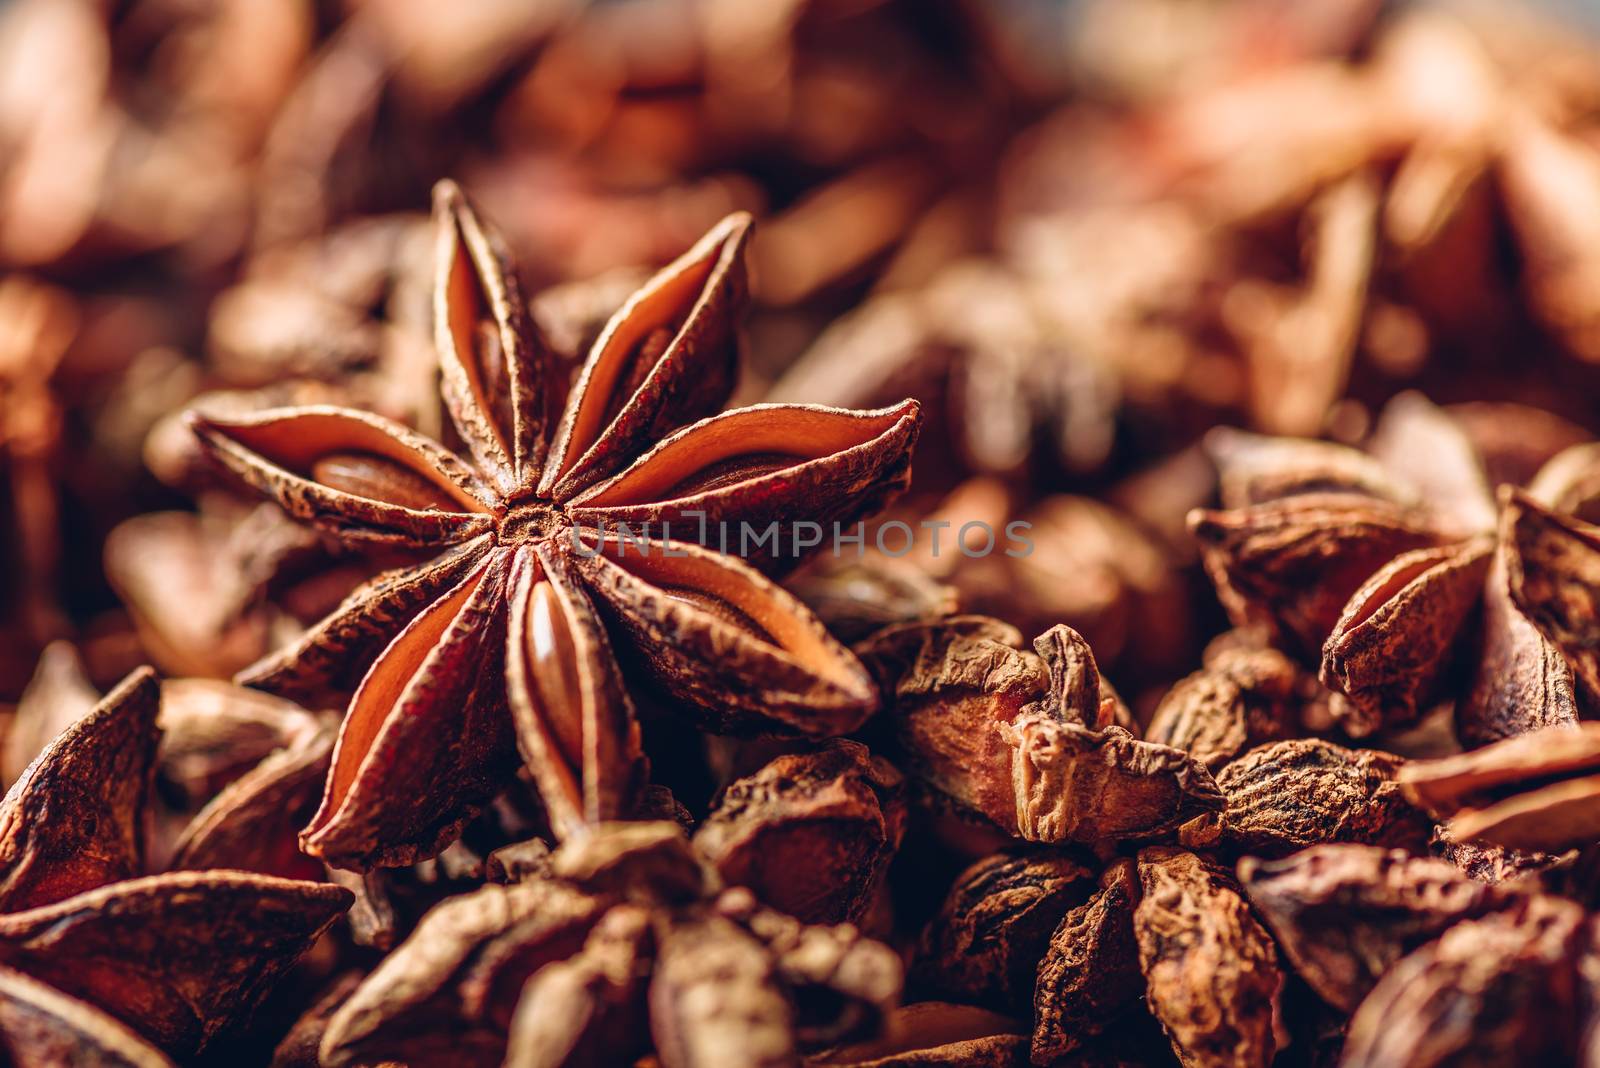 Background of Star Anise Fruits and Seeds.